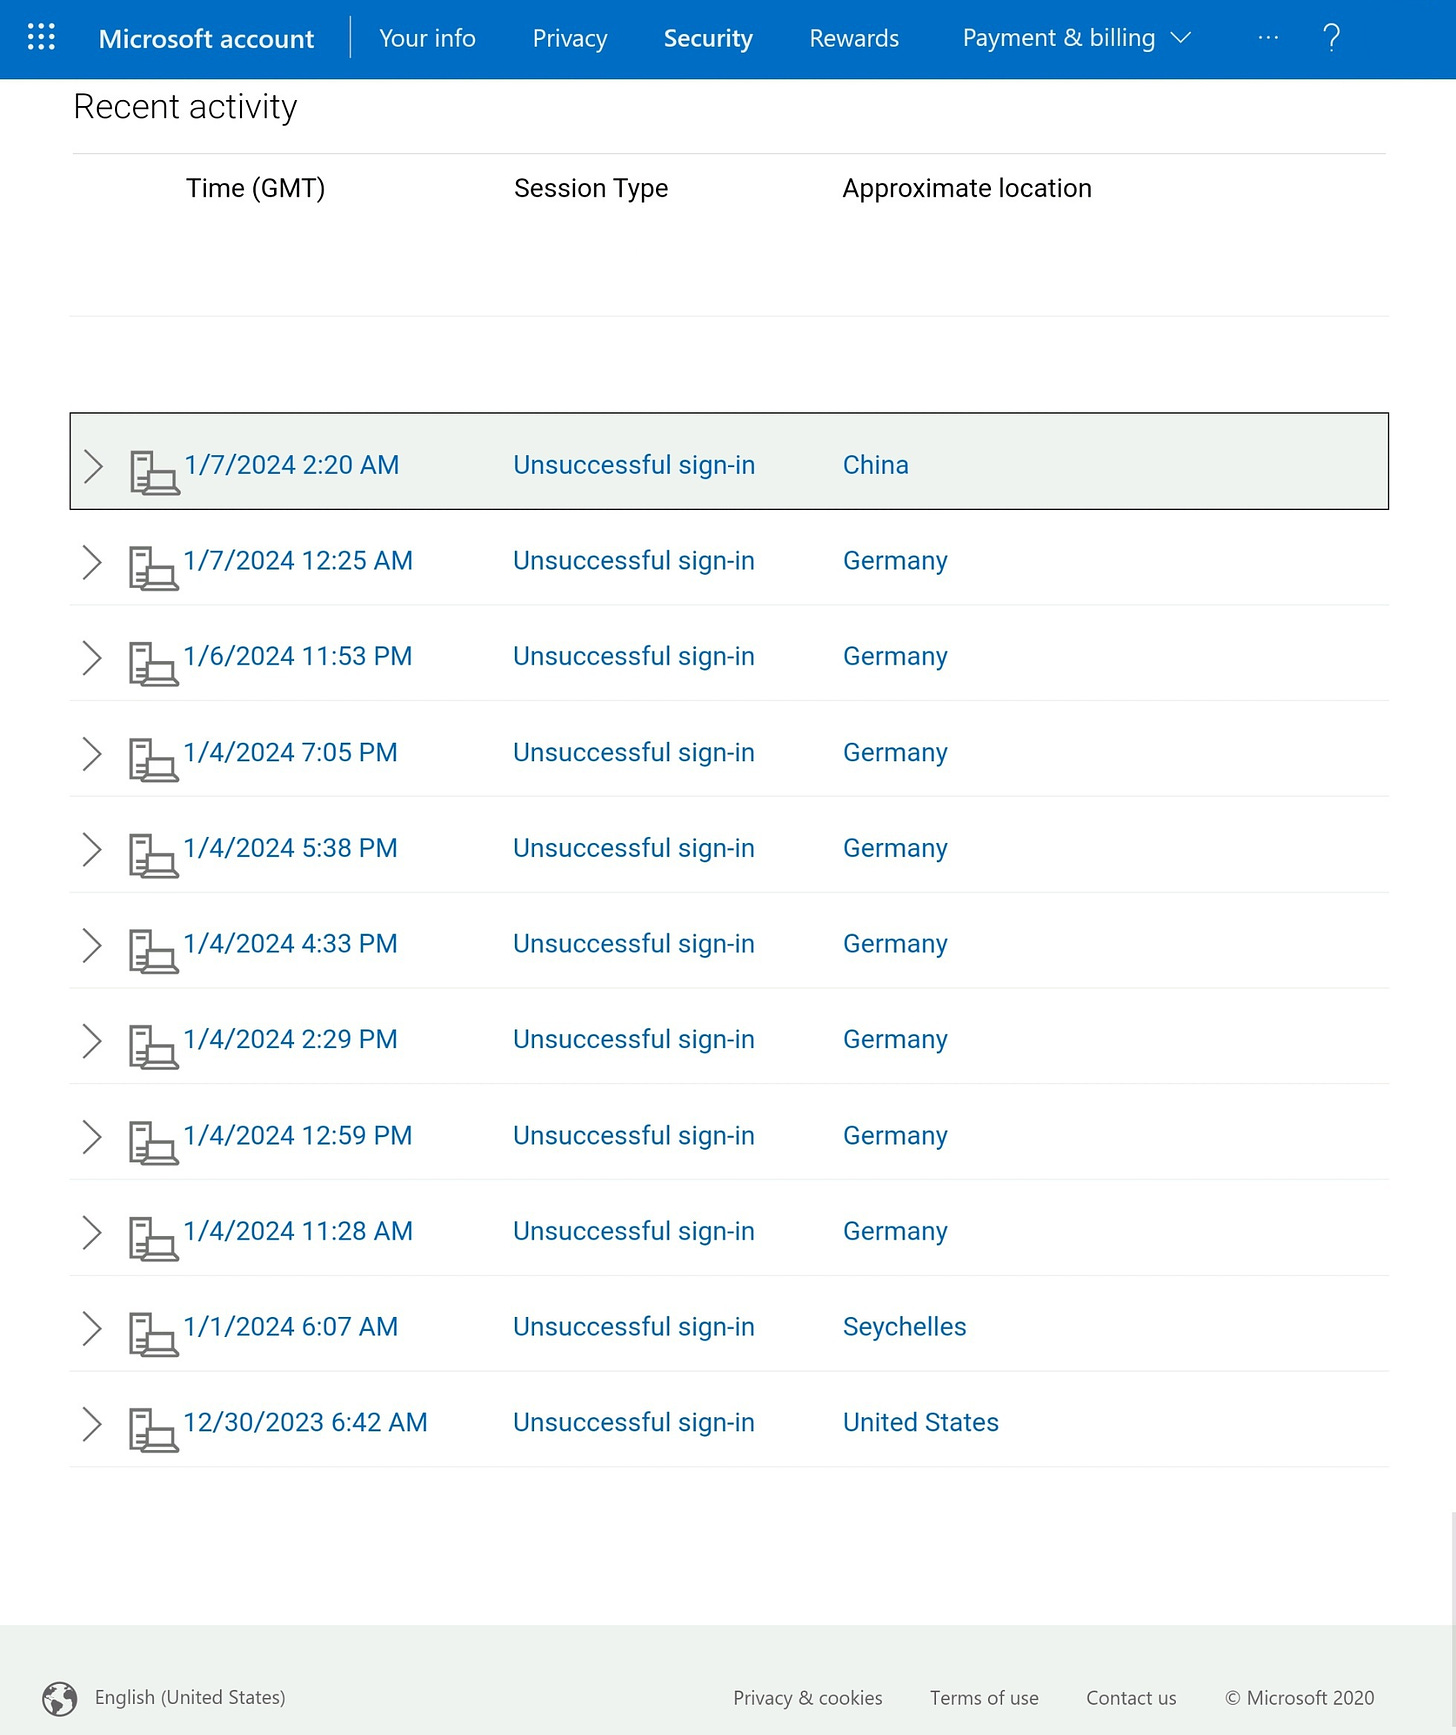 Screenshot of Microsoft's recent activity page showing a series of unsuccessful sign-in attempts from various approximate location and time.